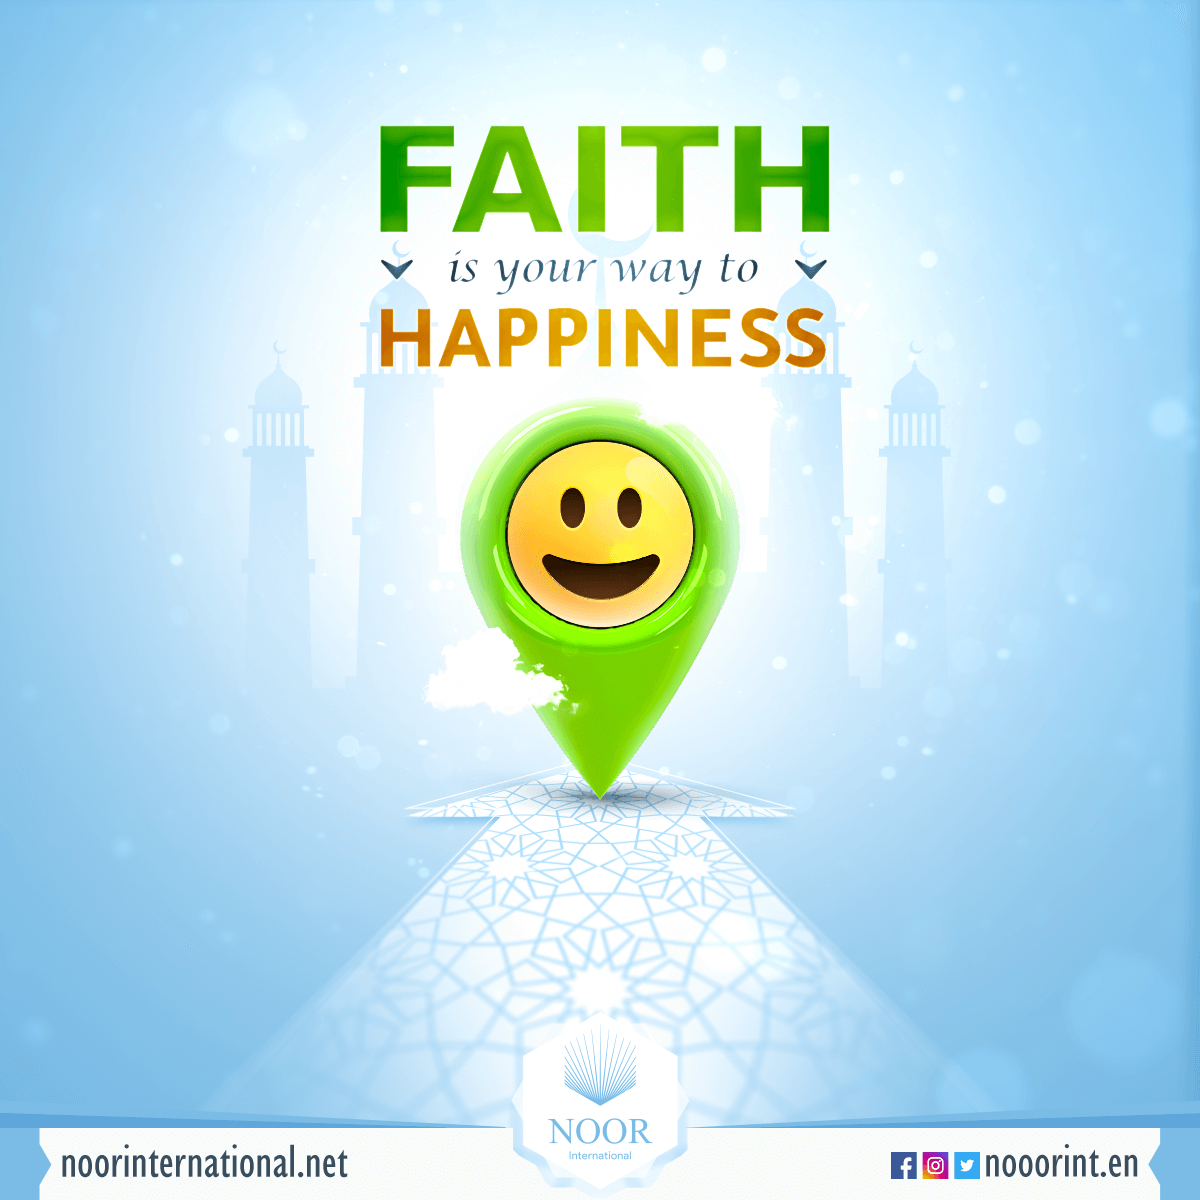 Faith is your way to happiness